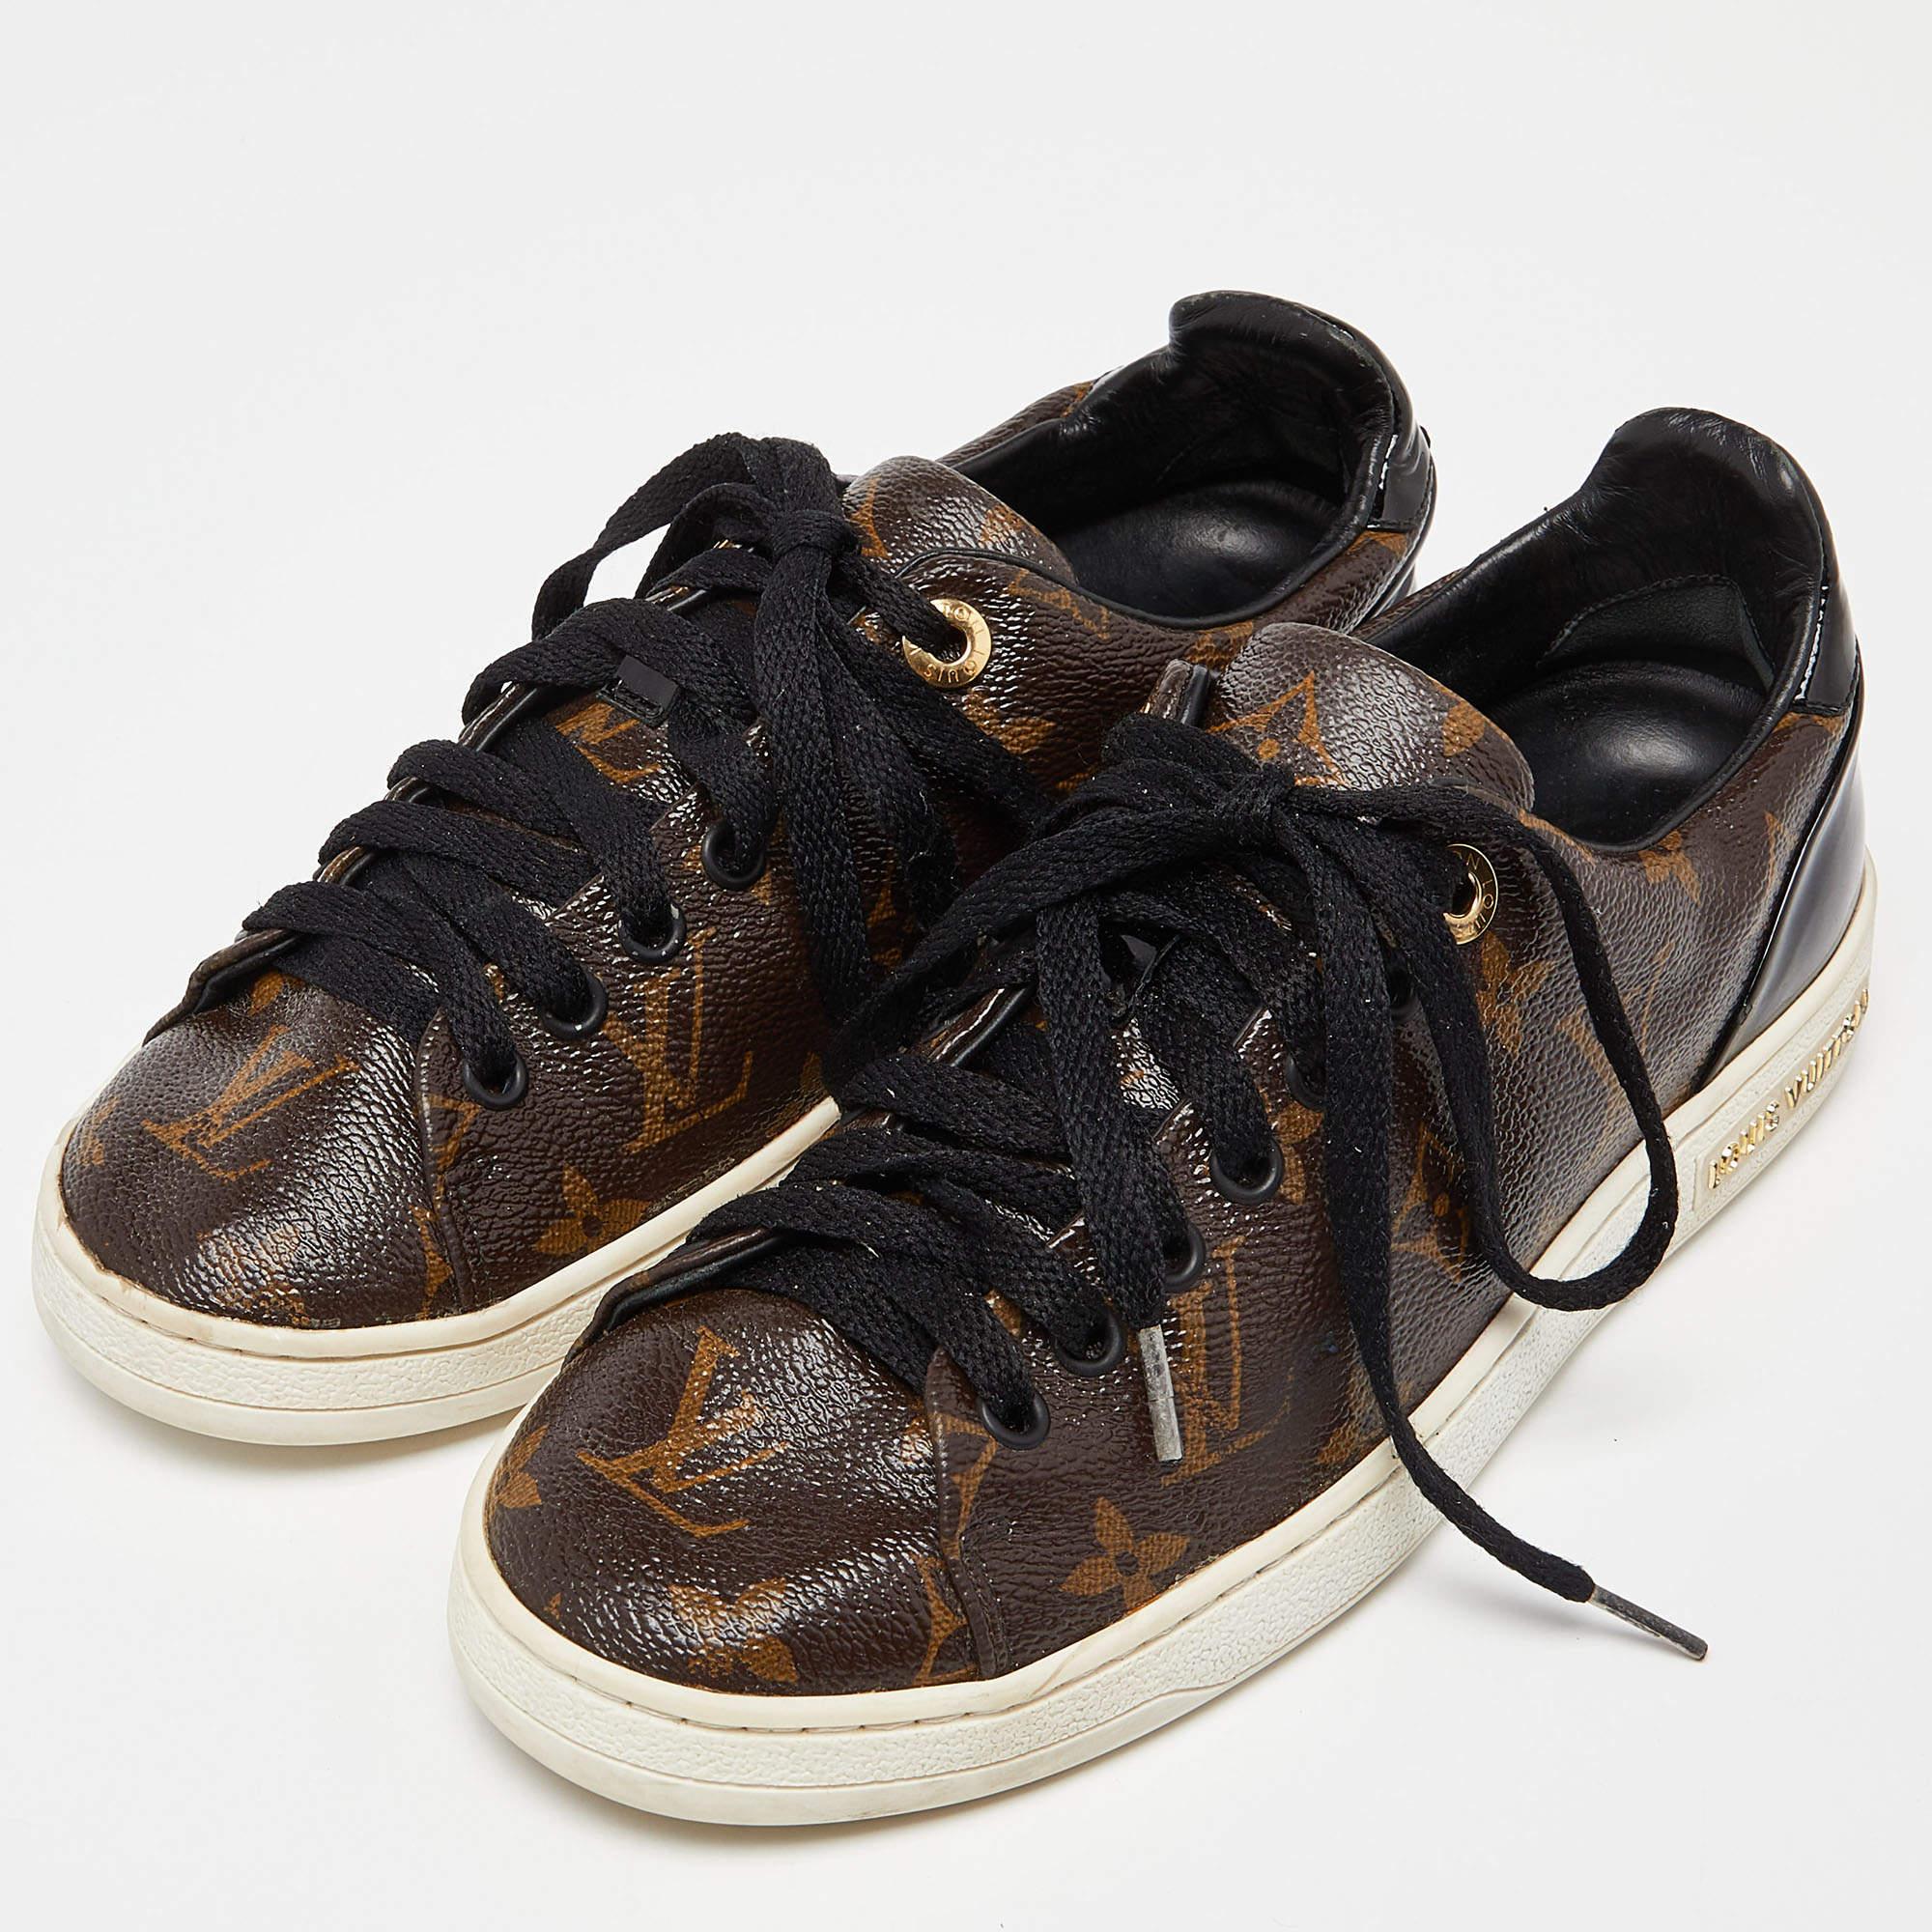 These Frontrow sneakers from Louis Vuitton are all you need to add an extra edge to your outfit. This pair has been crafted from Monogram canvas along with patent leather and styled with round toes, lace-ups and gold-tone logo details on the